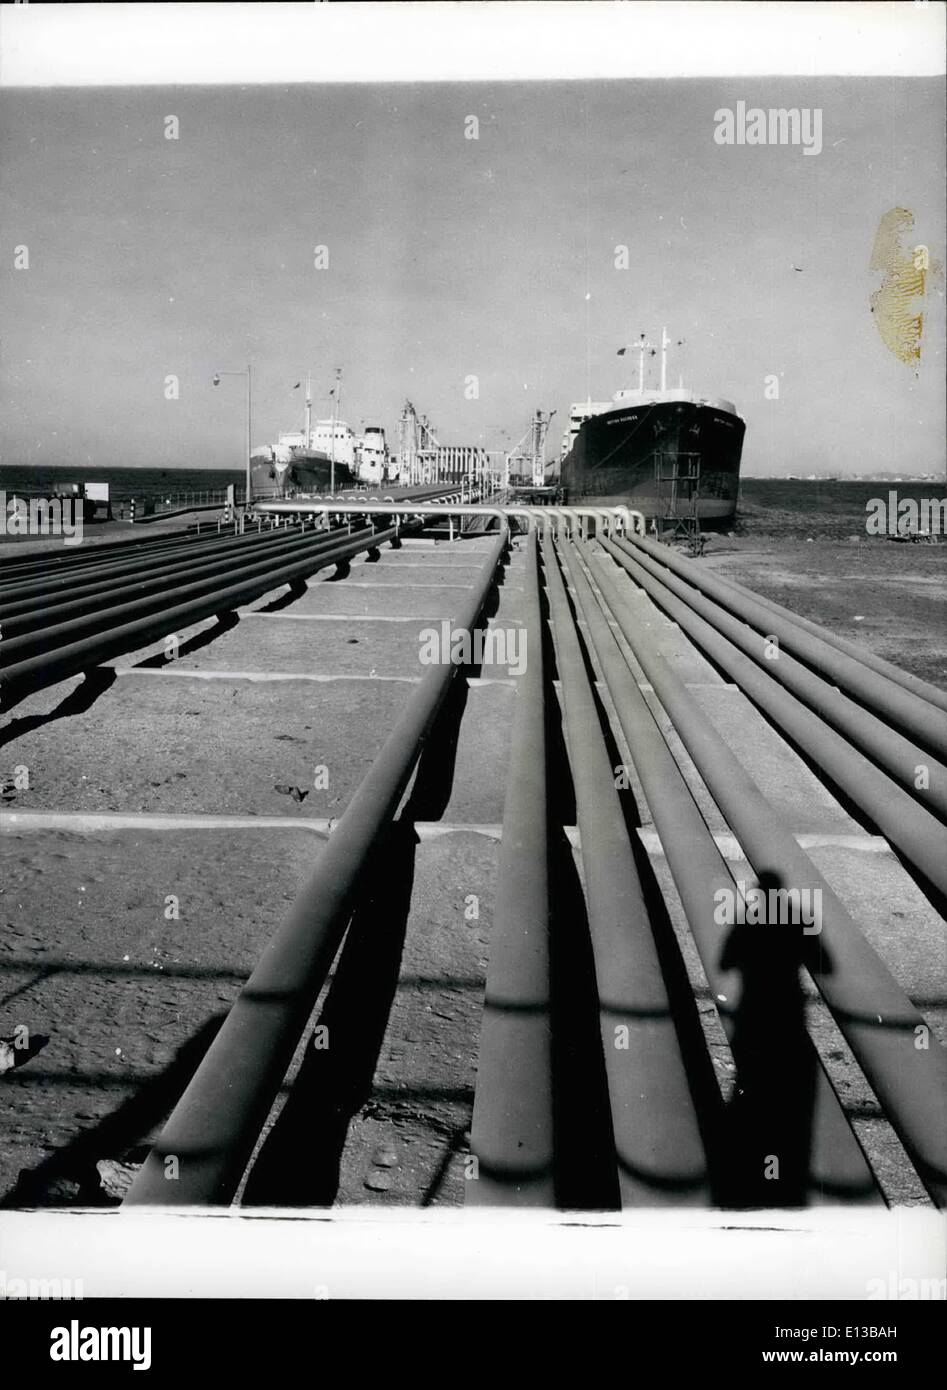 Feb. 29, 2012 - Looking along the oil lines which run from the storage tanks to the loading quads, alongside which lay two tankers - Atlantic lord(left) and British Dutchess. Stock Photo